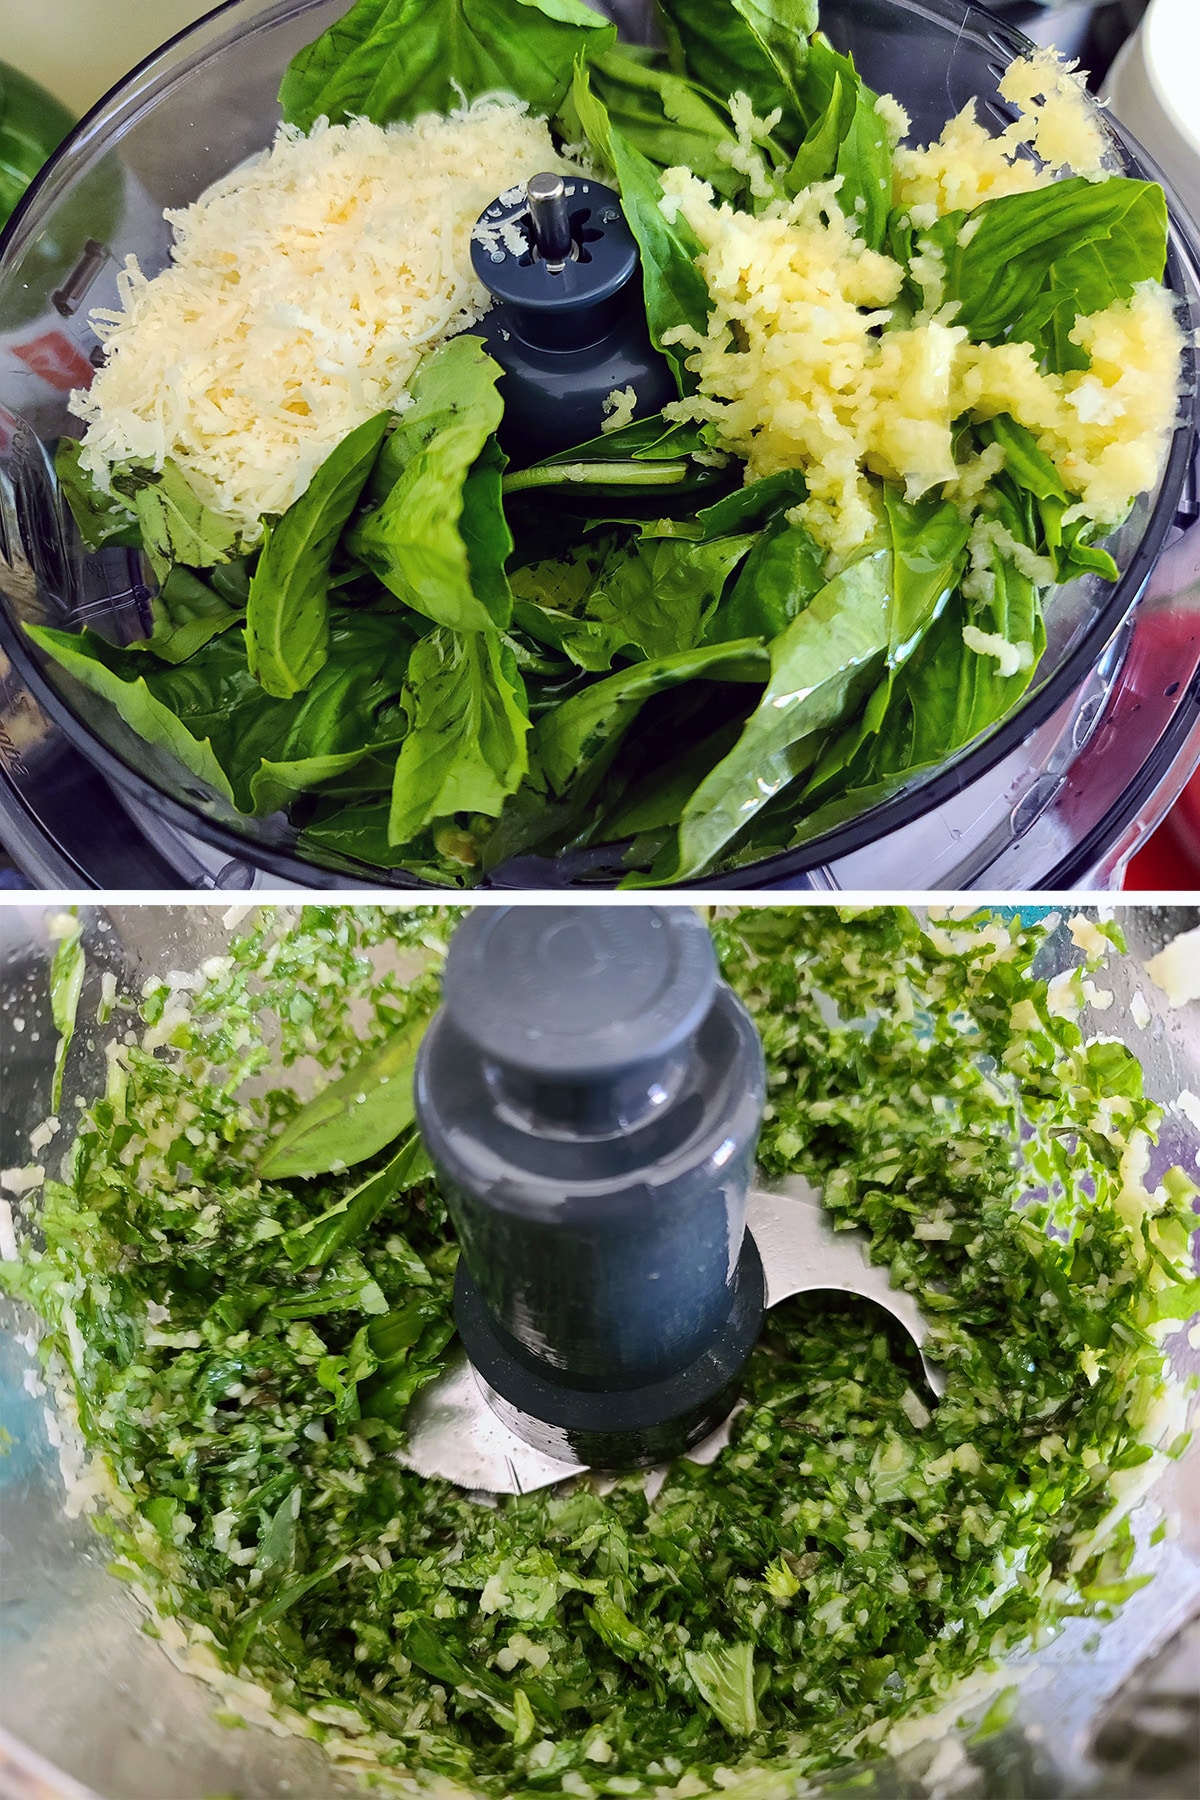 Basil, cheese, garlic, and olive oil in a food processor, before and after being chopped up.